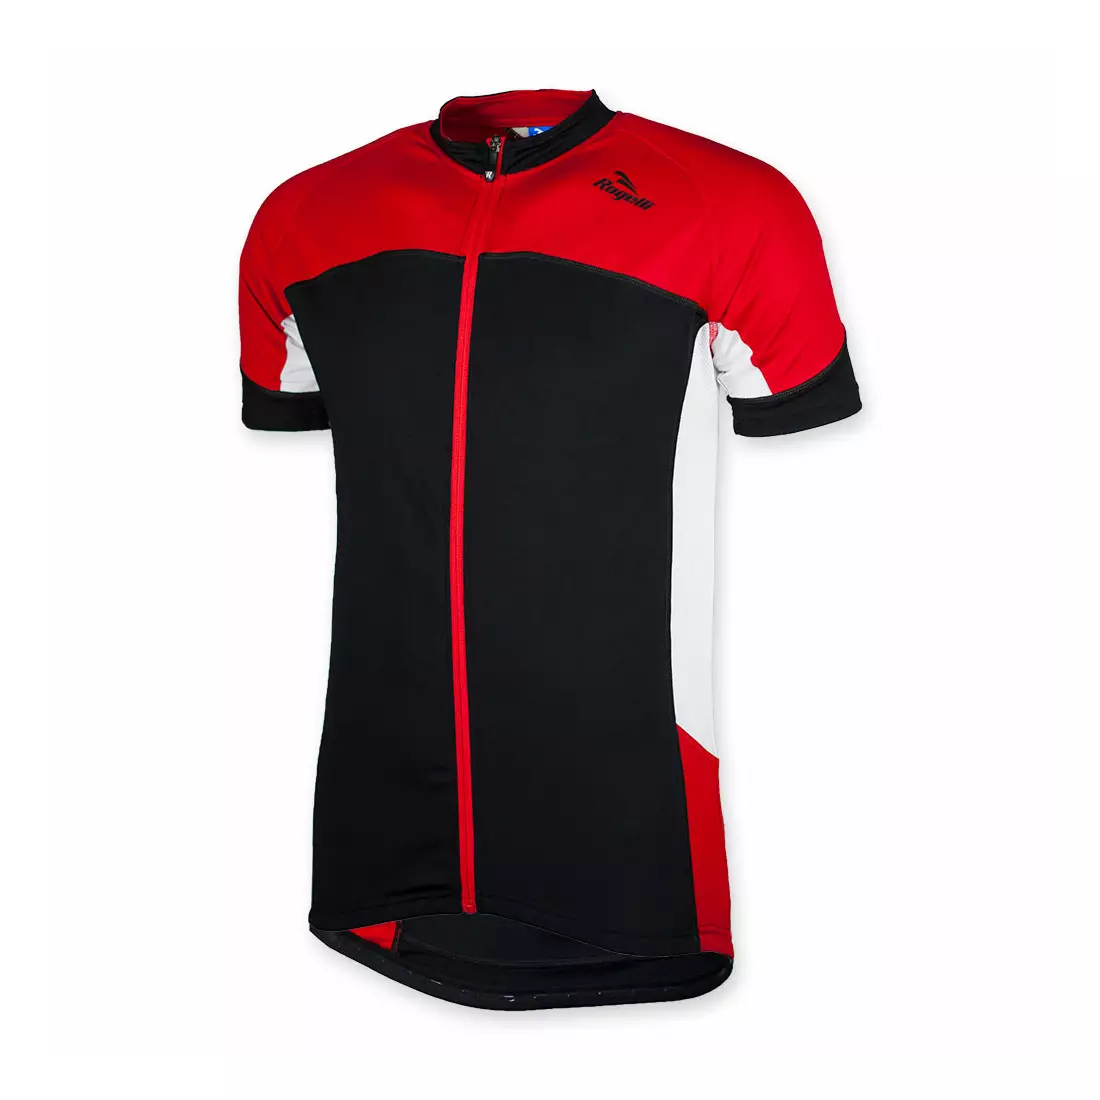 ROGELLI RECCO men's cycling jersey, black and red